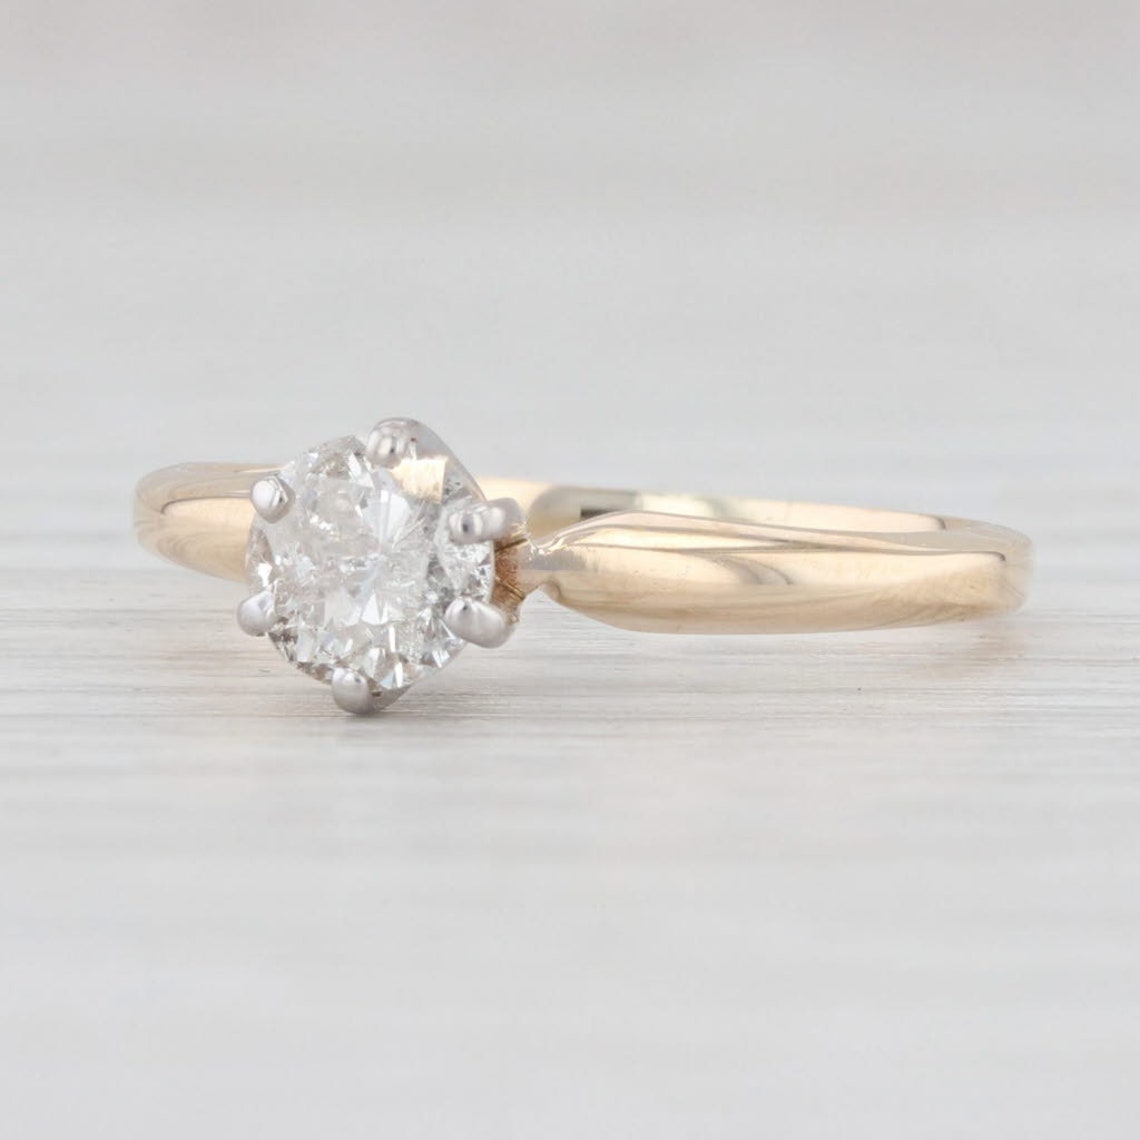 A 14K white and yellow gold ring with a stunning diamond gem